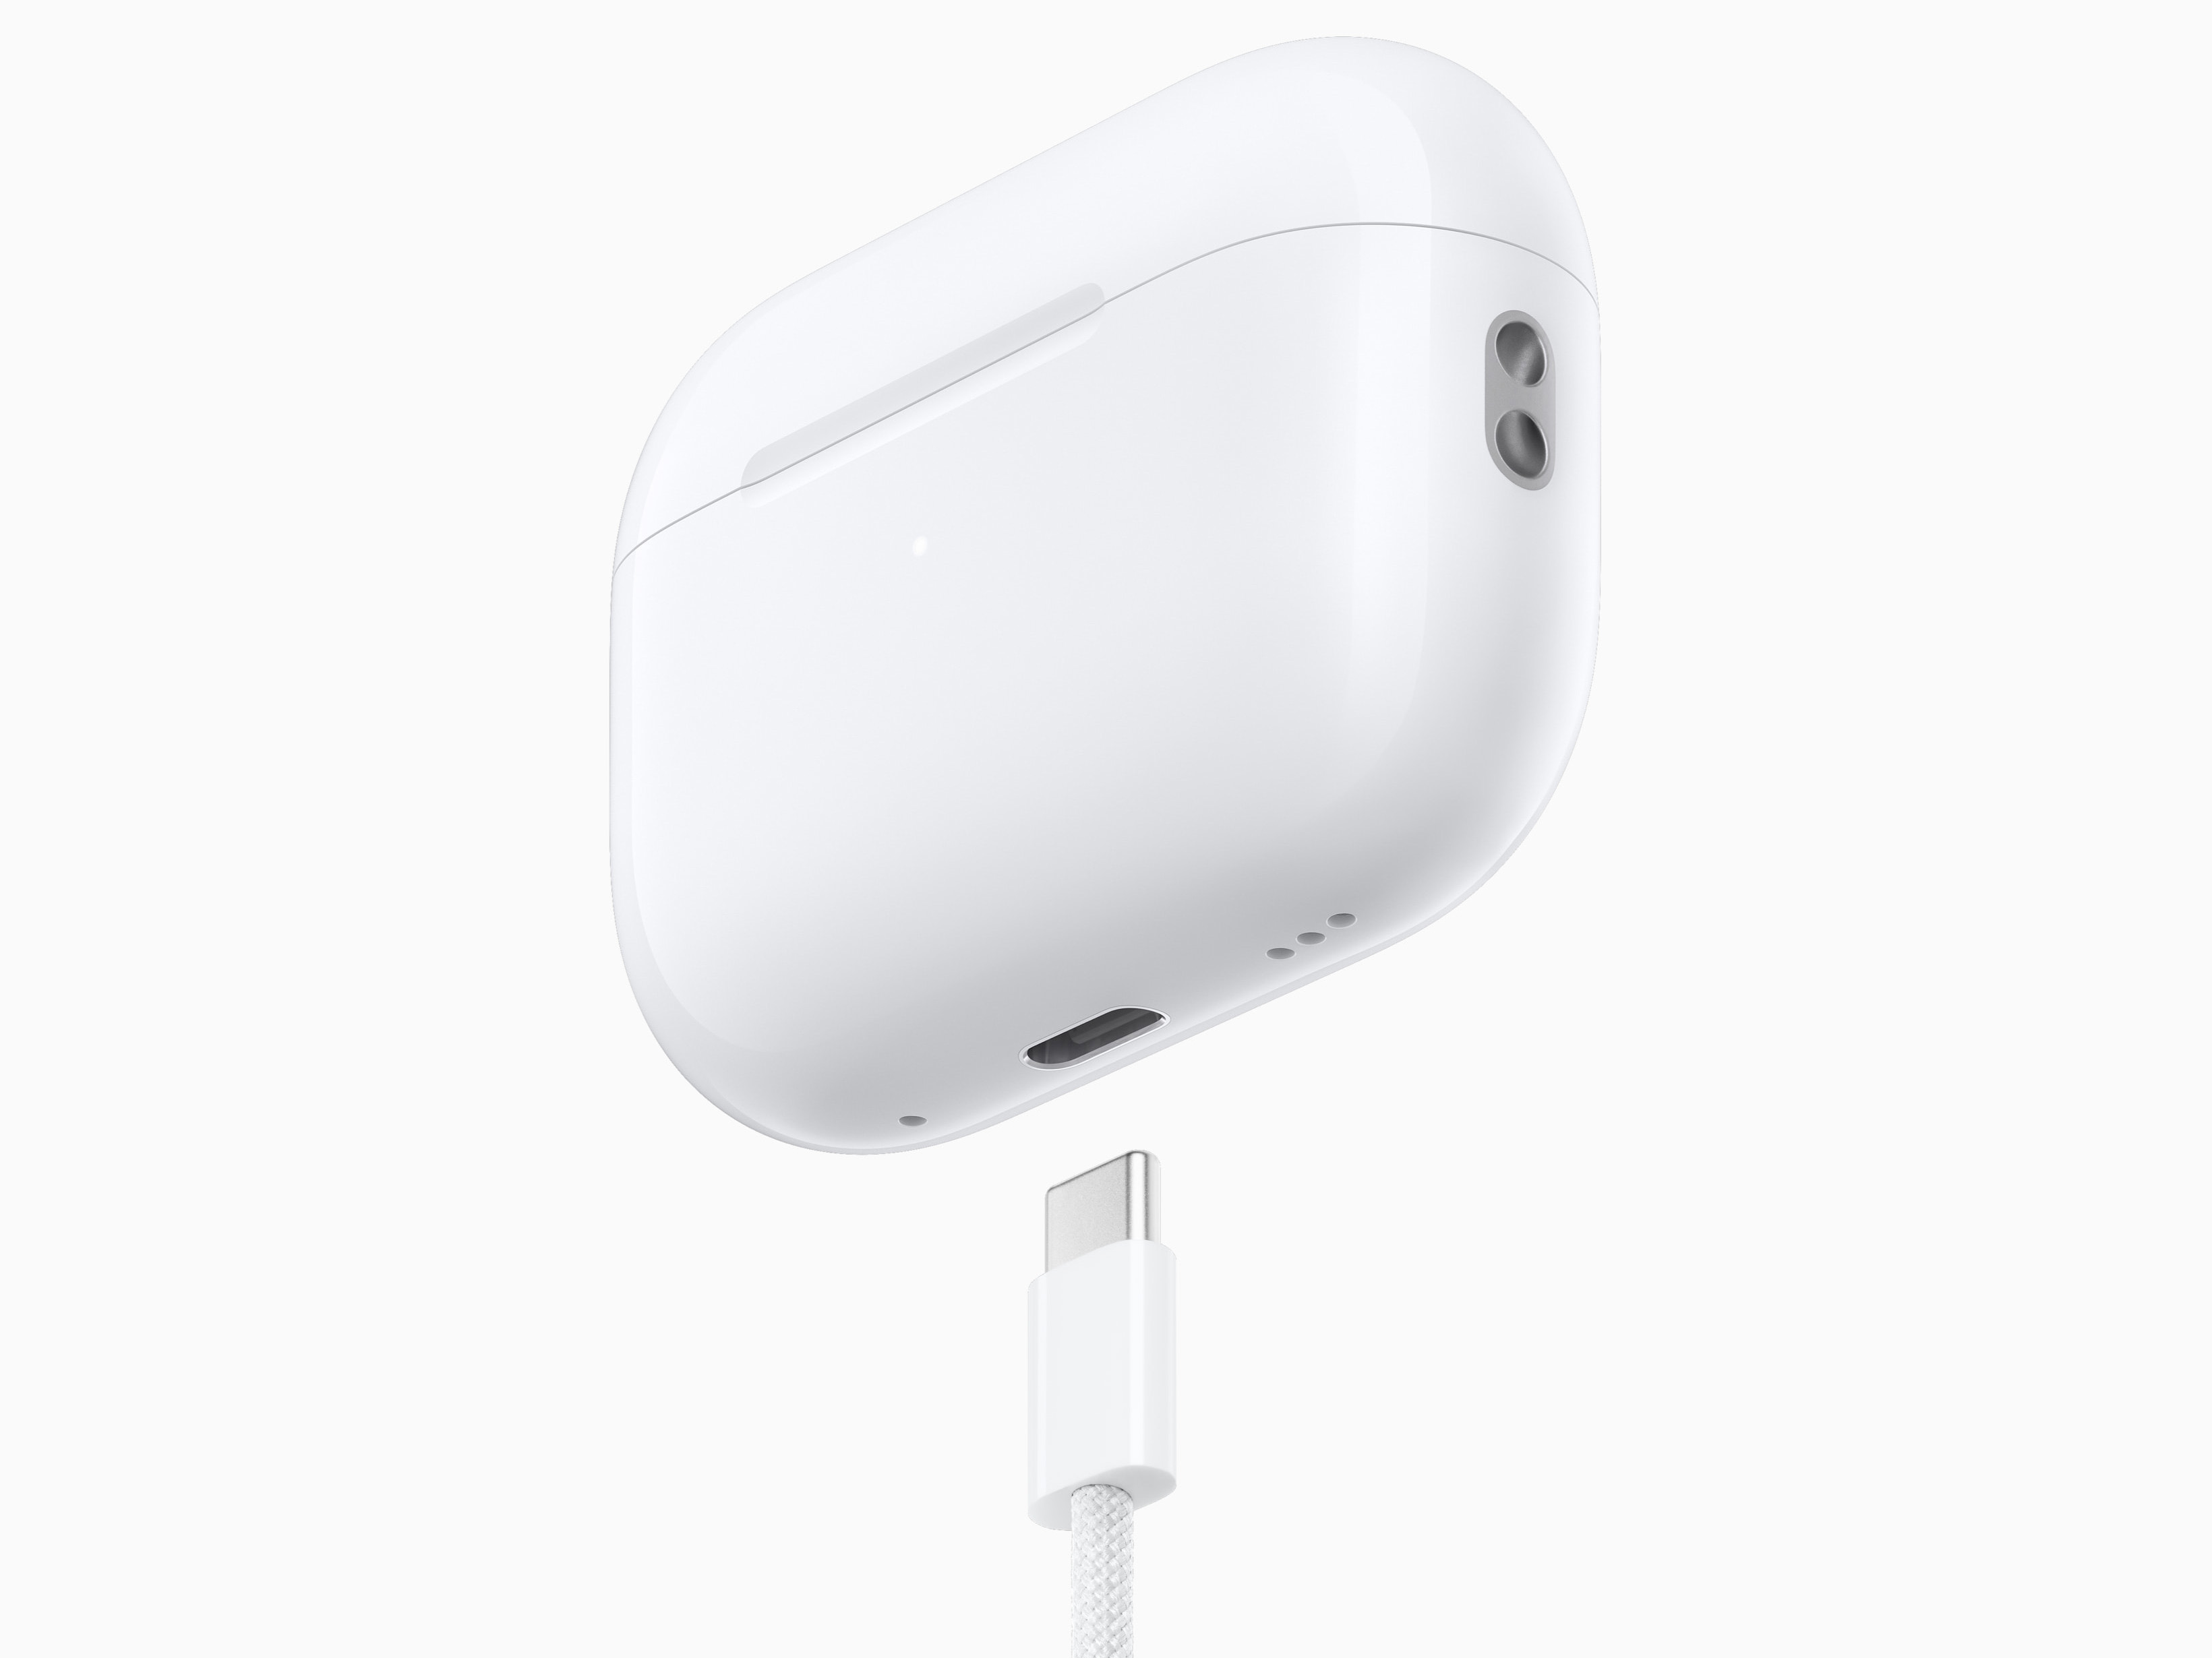 Buy Apple Airpods with Charging Case